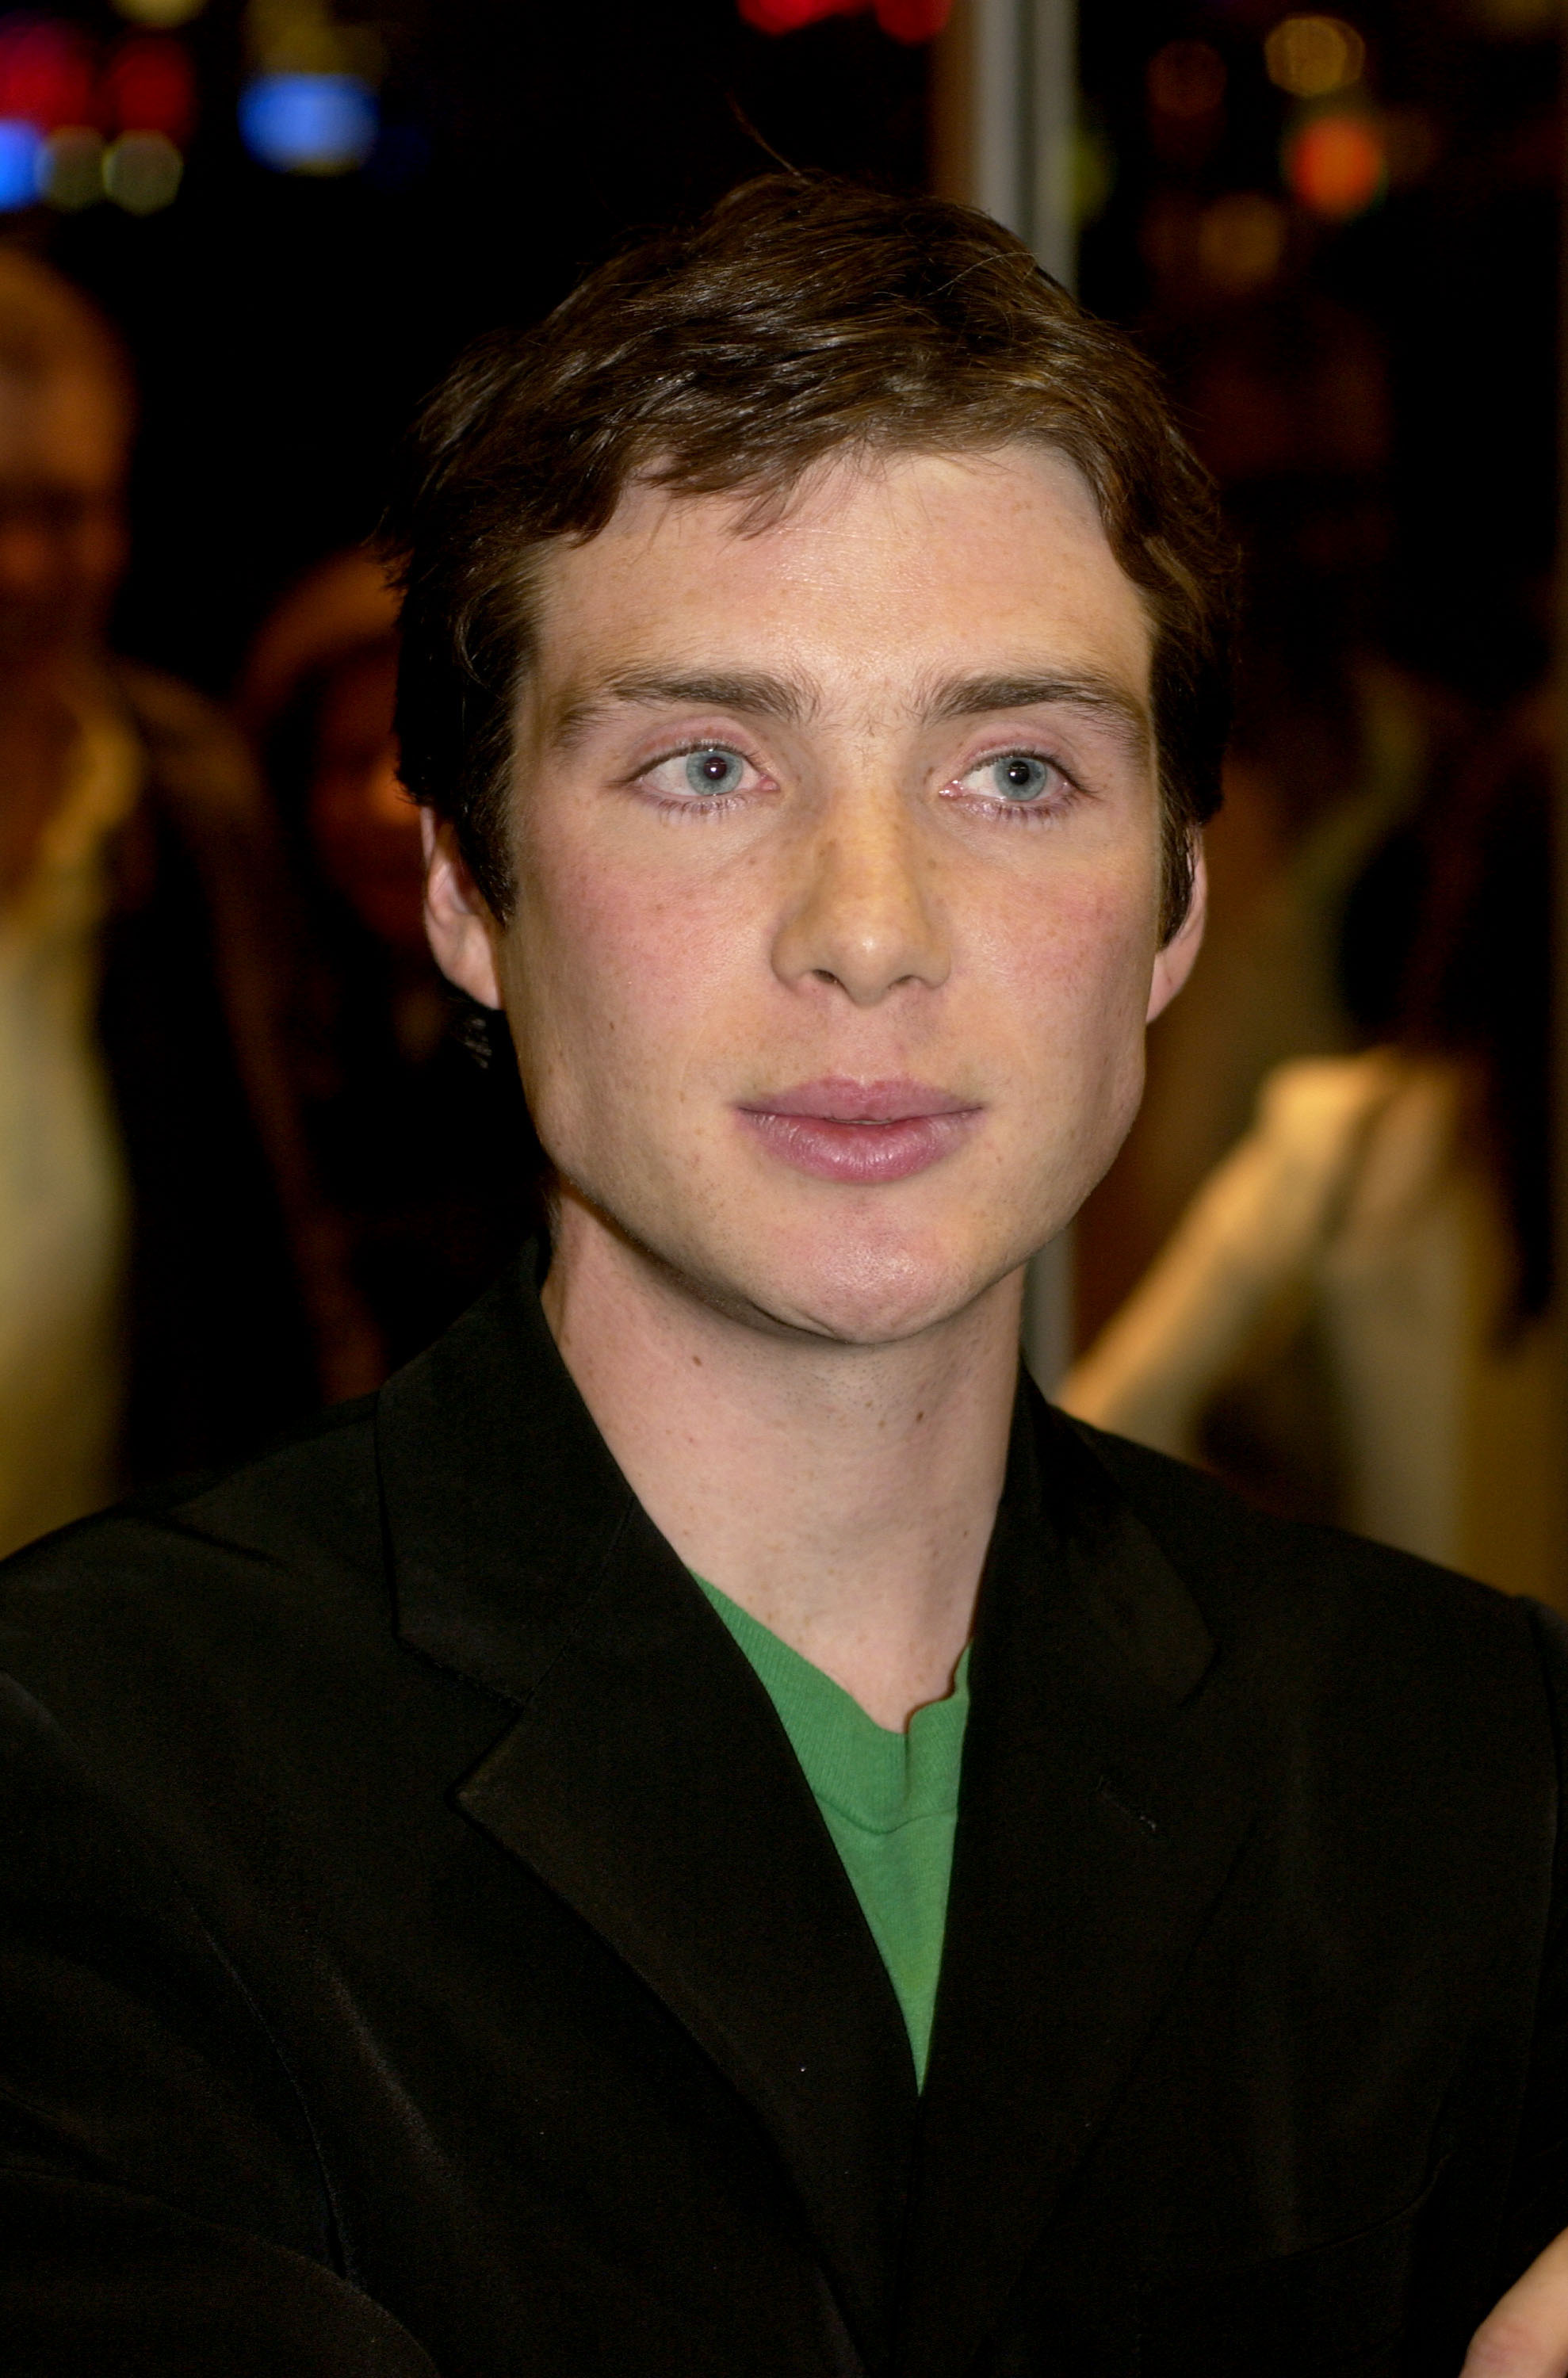 Cillian Murphy attends the "The Girl With A Pearl Earing" screening on October 30, 2003 in London, England | Source: Getty Images